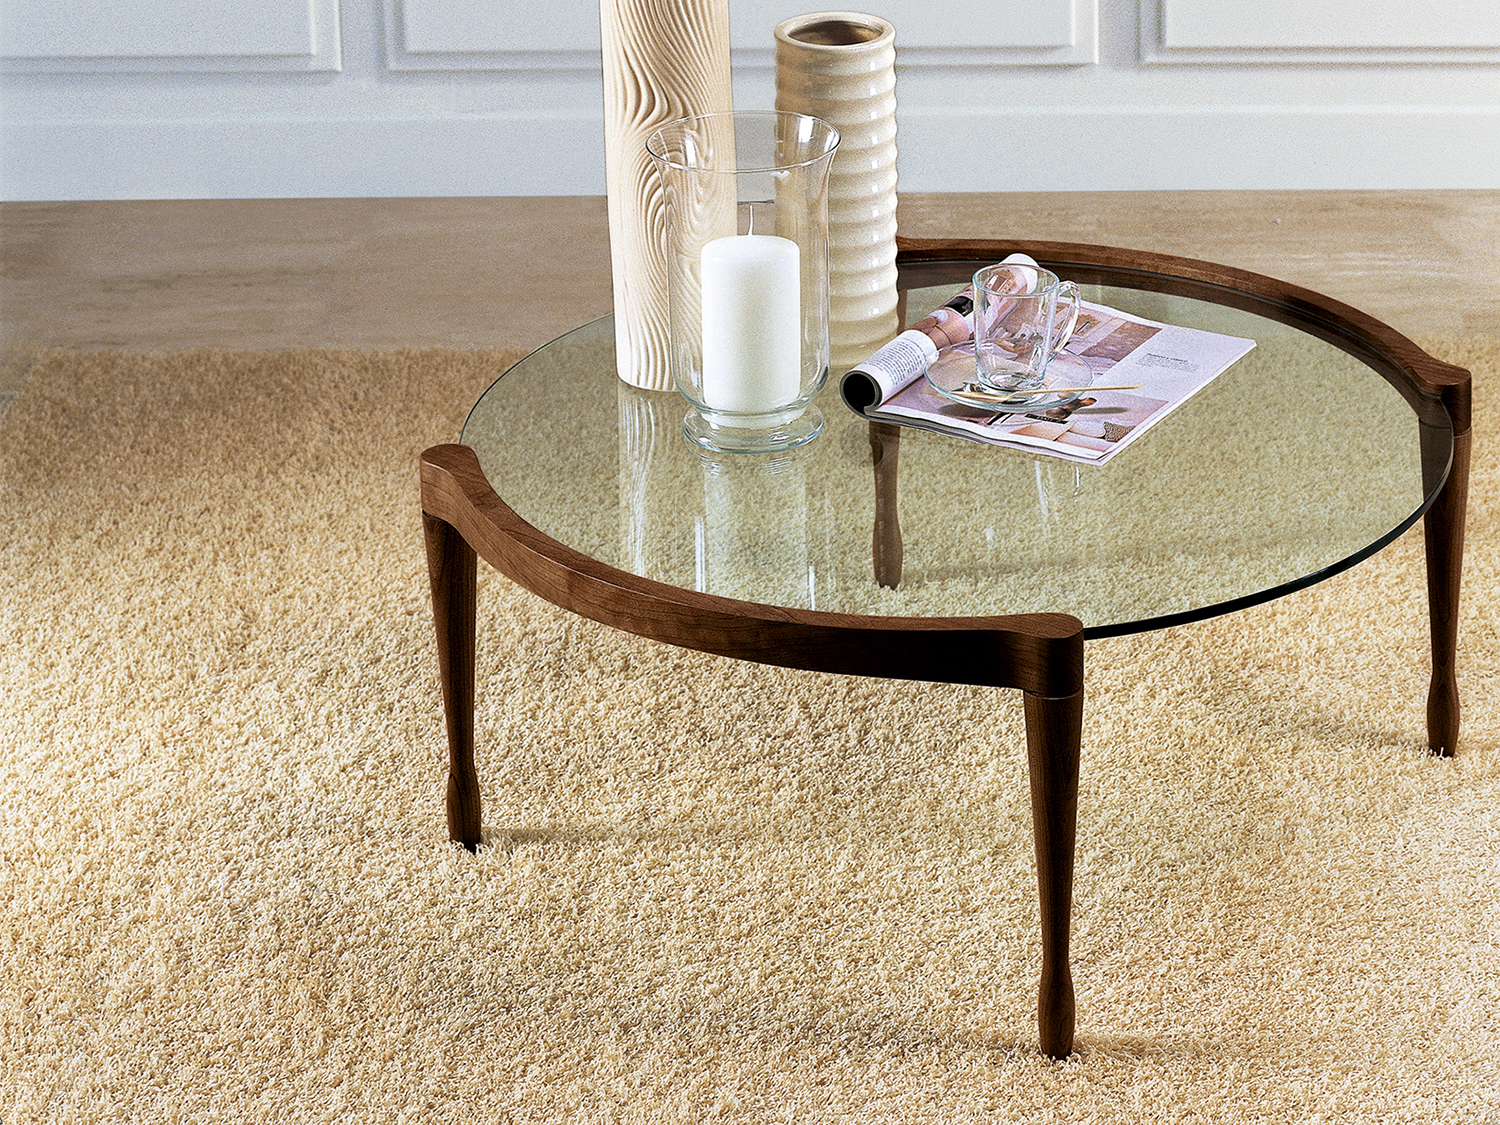 GIOTTO LIVING TABLE